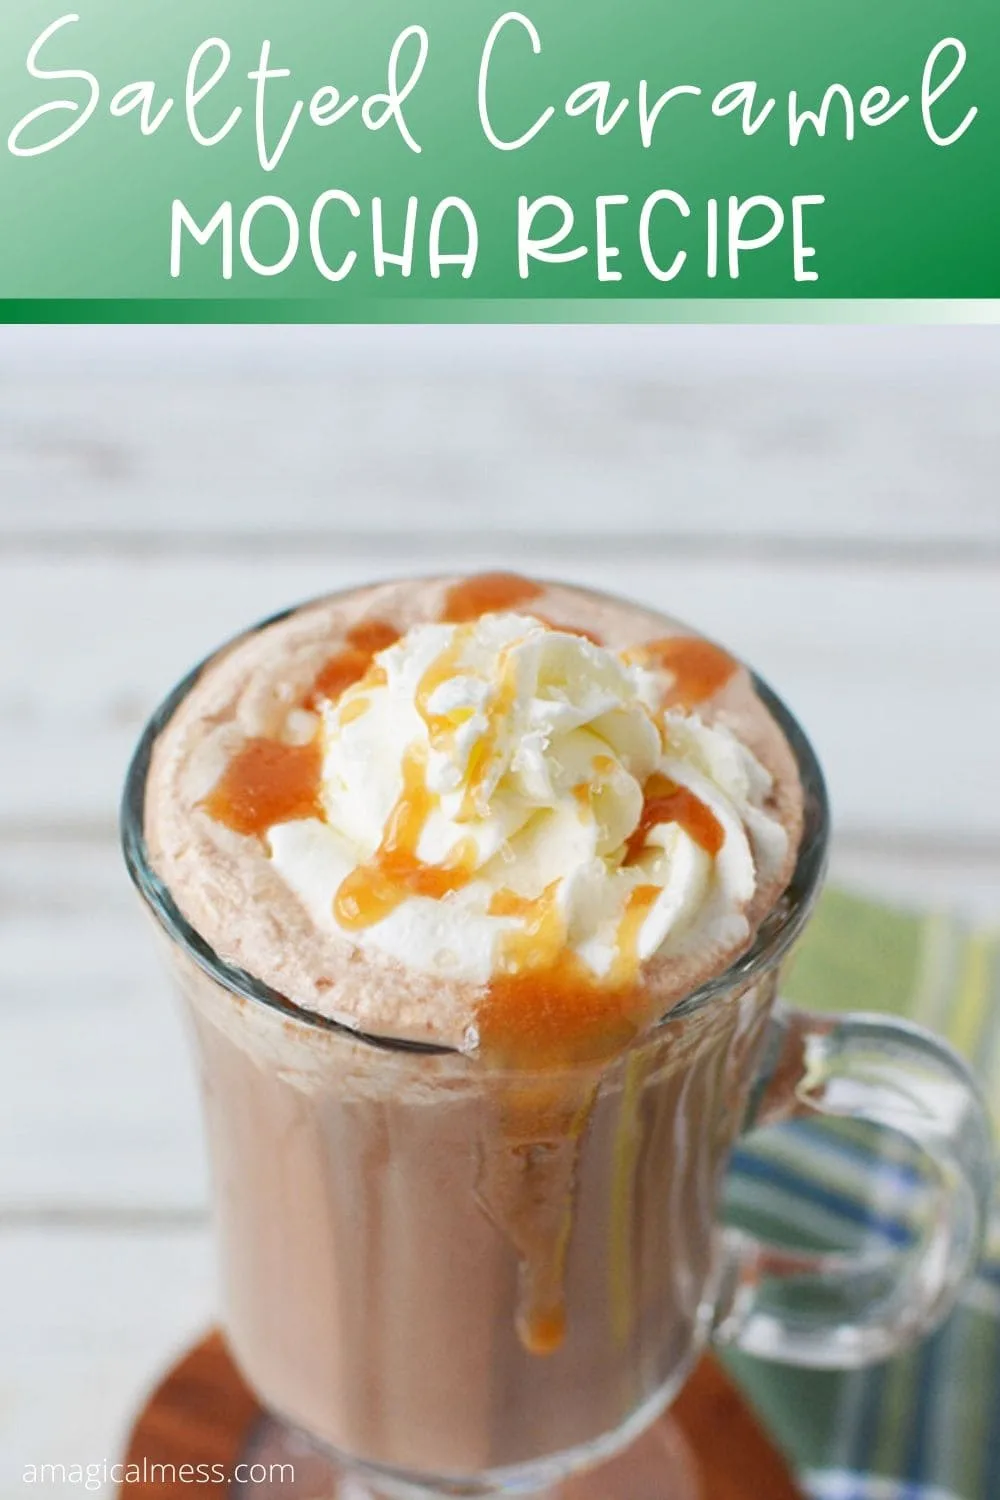 Coffee drink topped with whipped cream and caramel